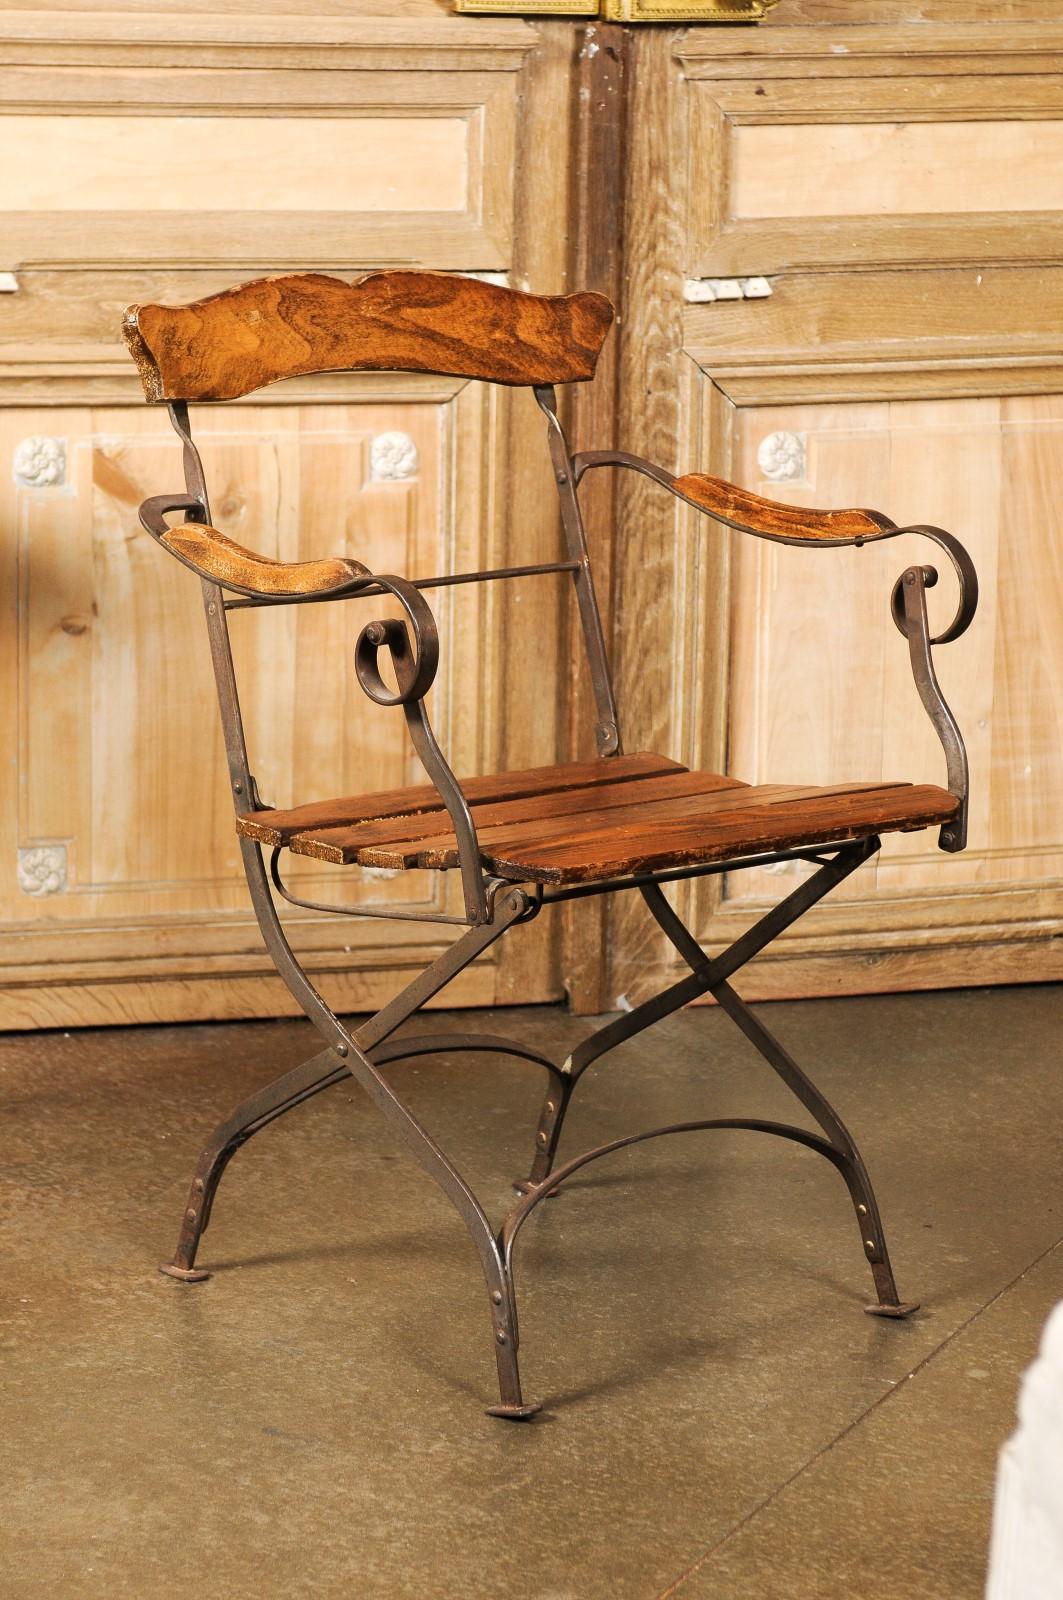 A rustic French Napoléon III period wood and iron garden folding chair from the mid 19th century, with curving arms and slatted seat. Created in France at the end of Emperor Napoléon III's reign, this rustic garden chair features an open back with